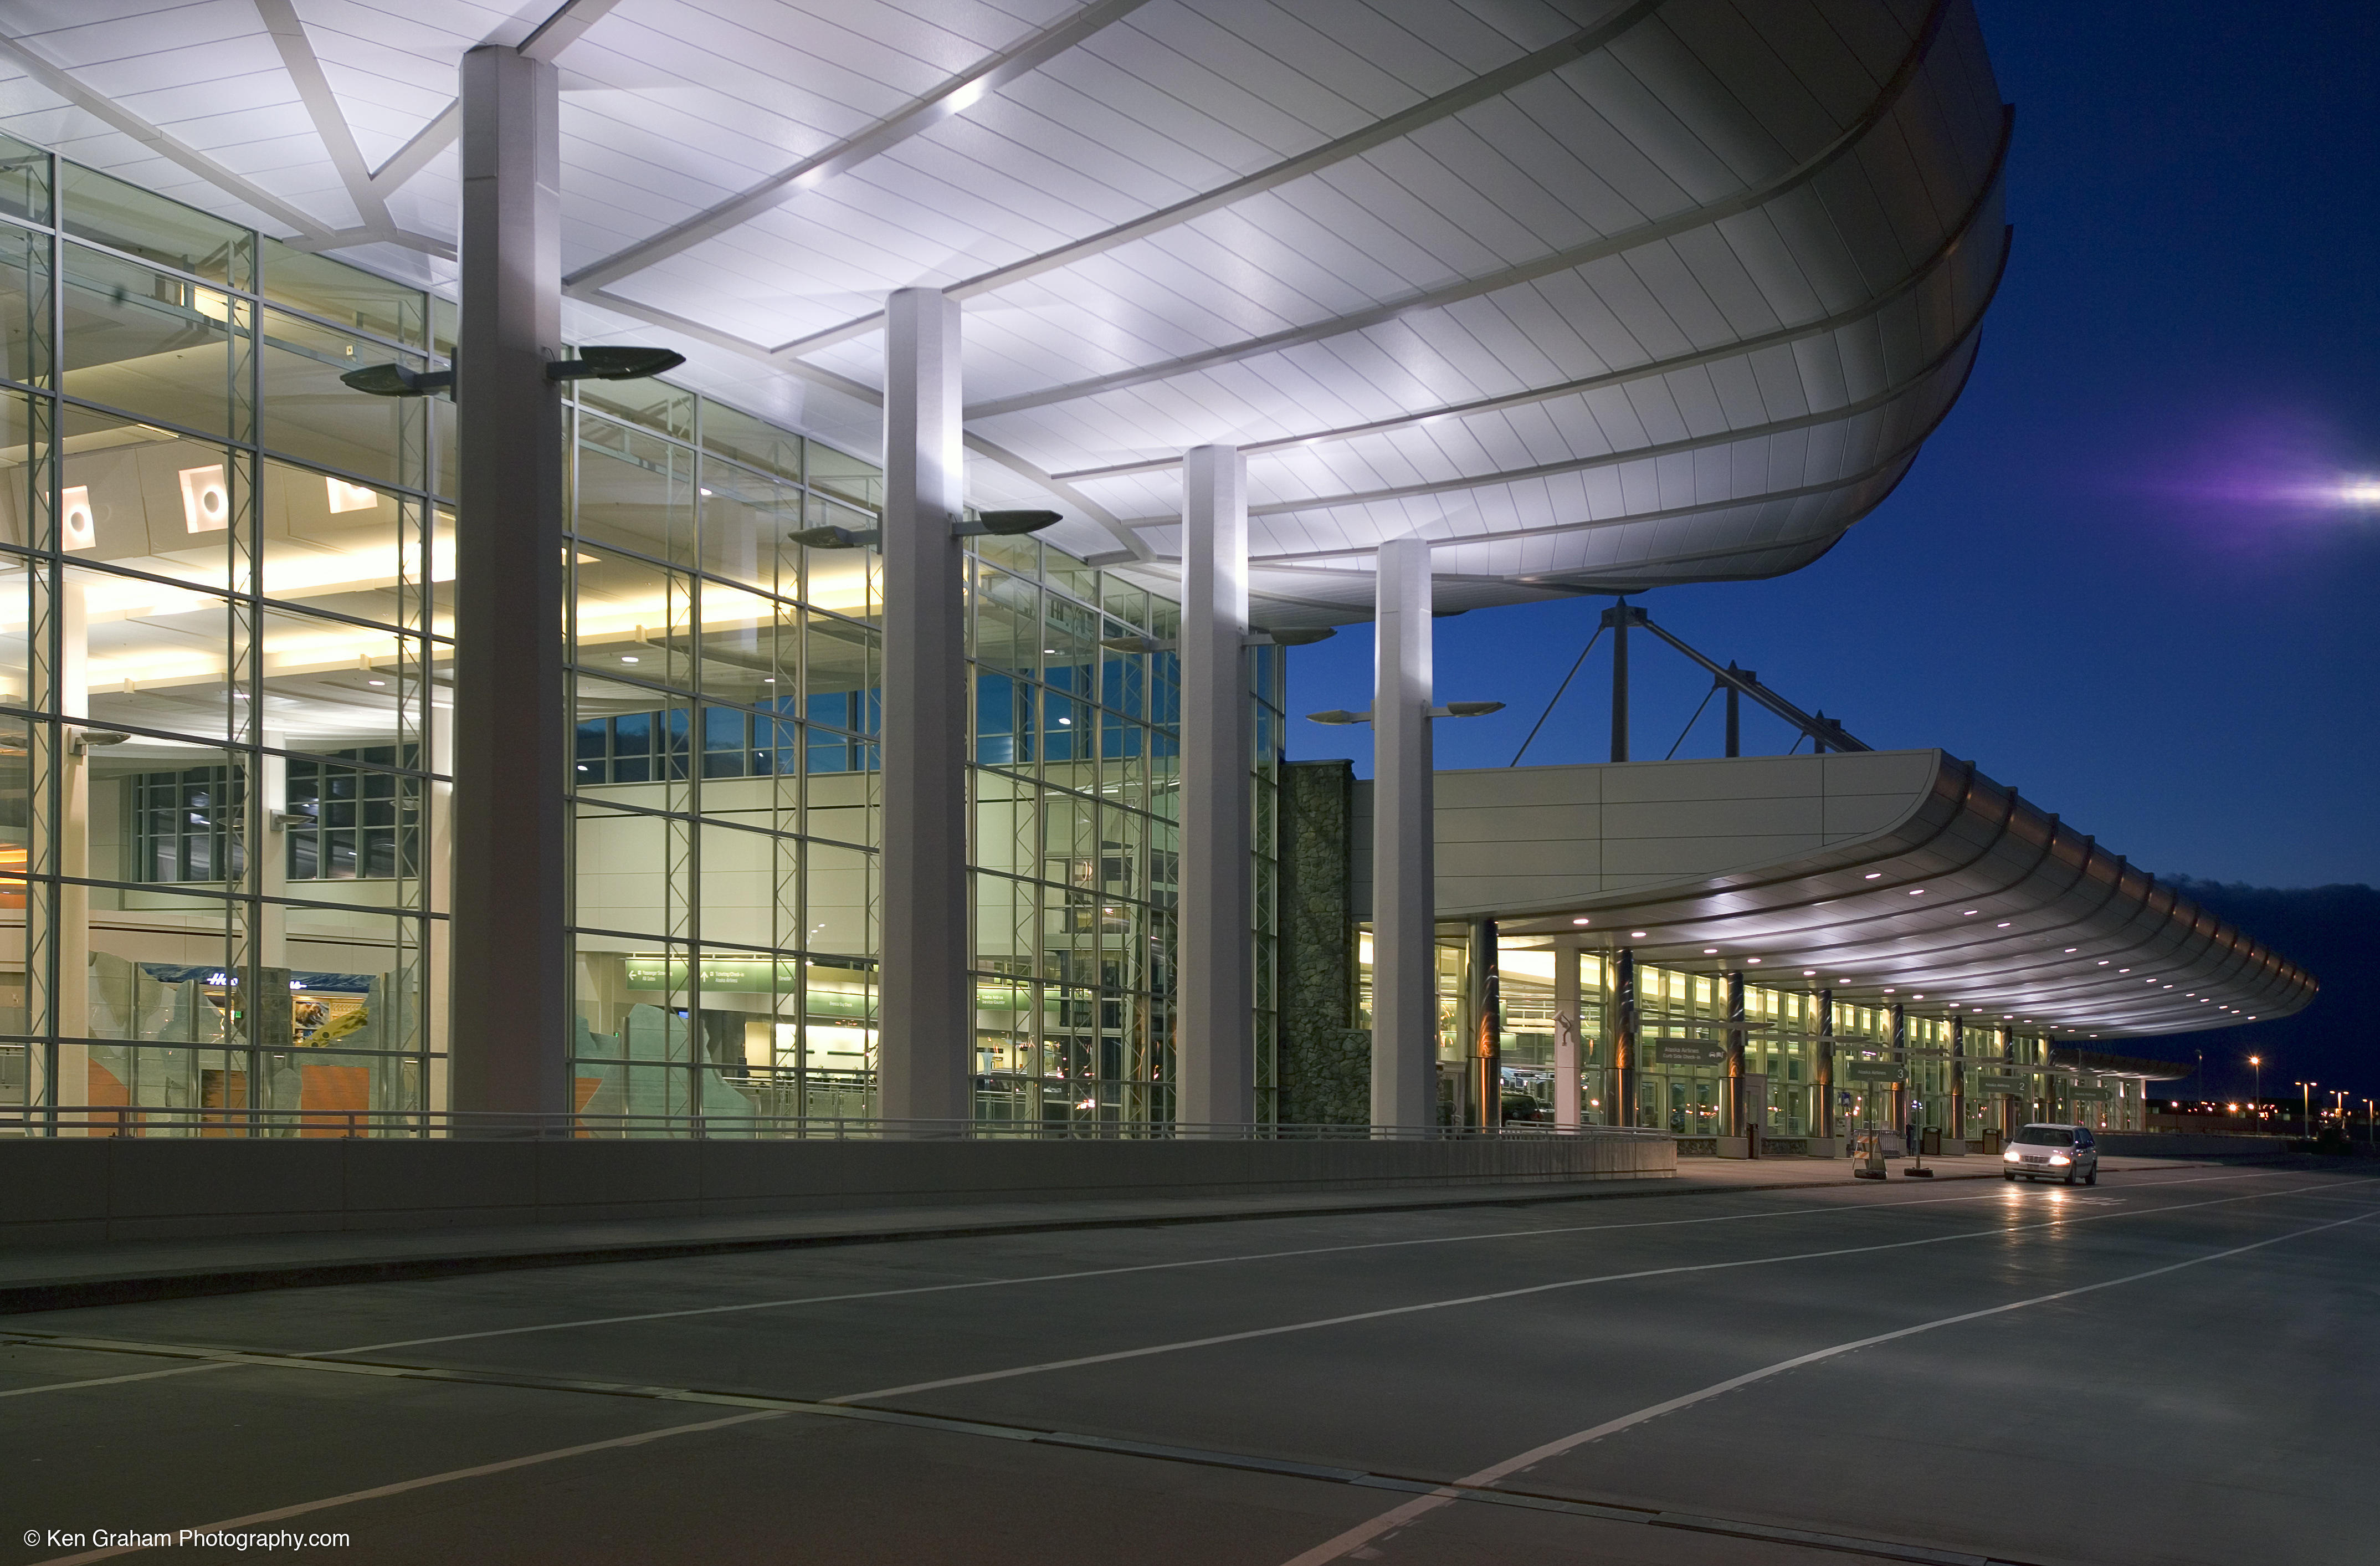 Anchorage Alaska International Airport | Glazing contractor: Commercial Contractors | Architect: McCool Carlson Green | Glass: SolarBan 60 Laminated